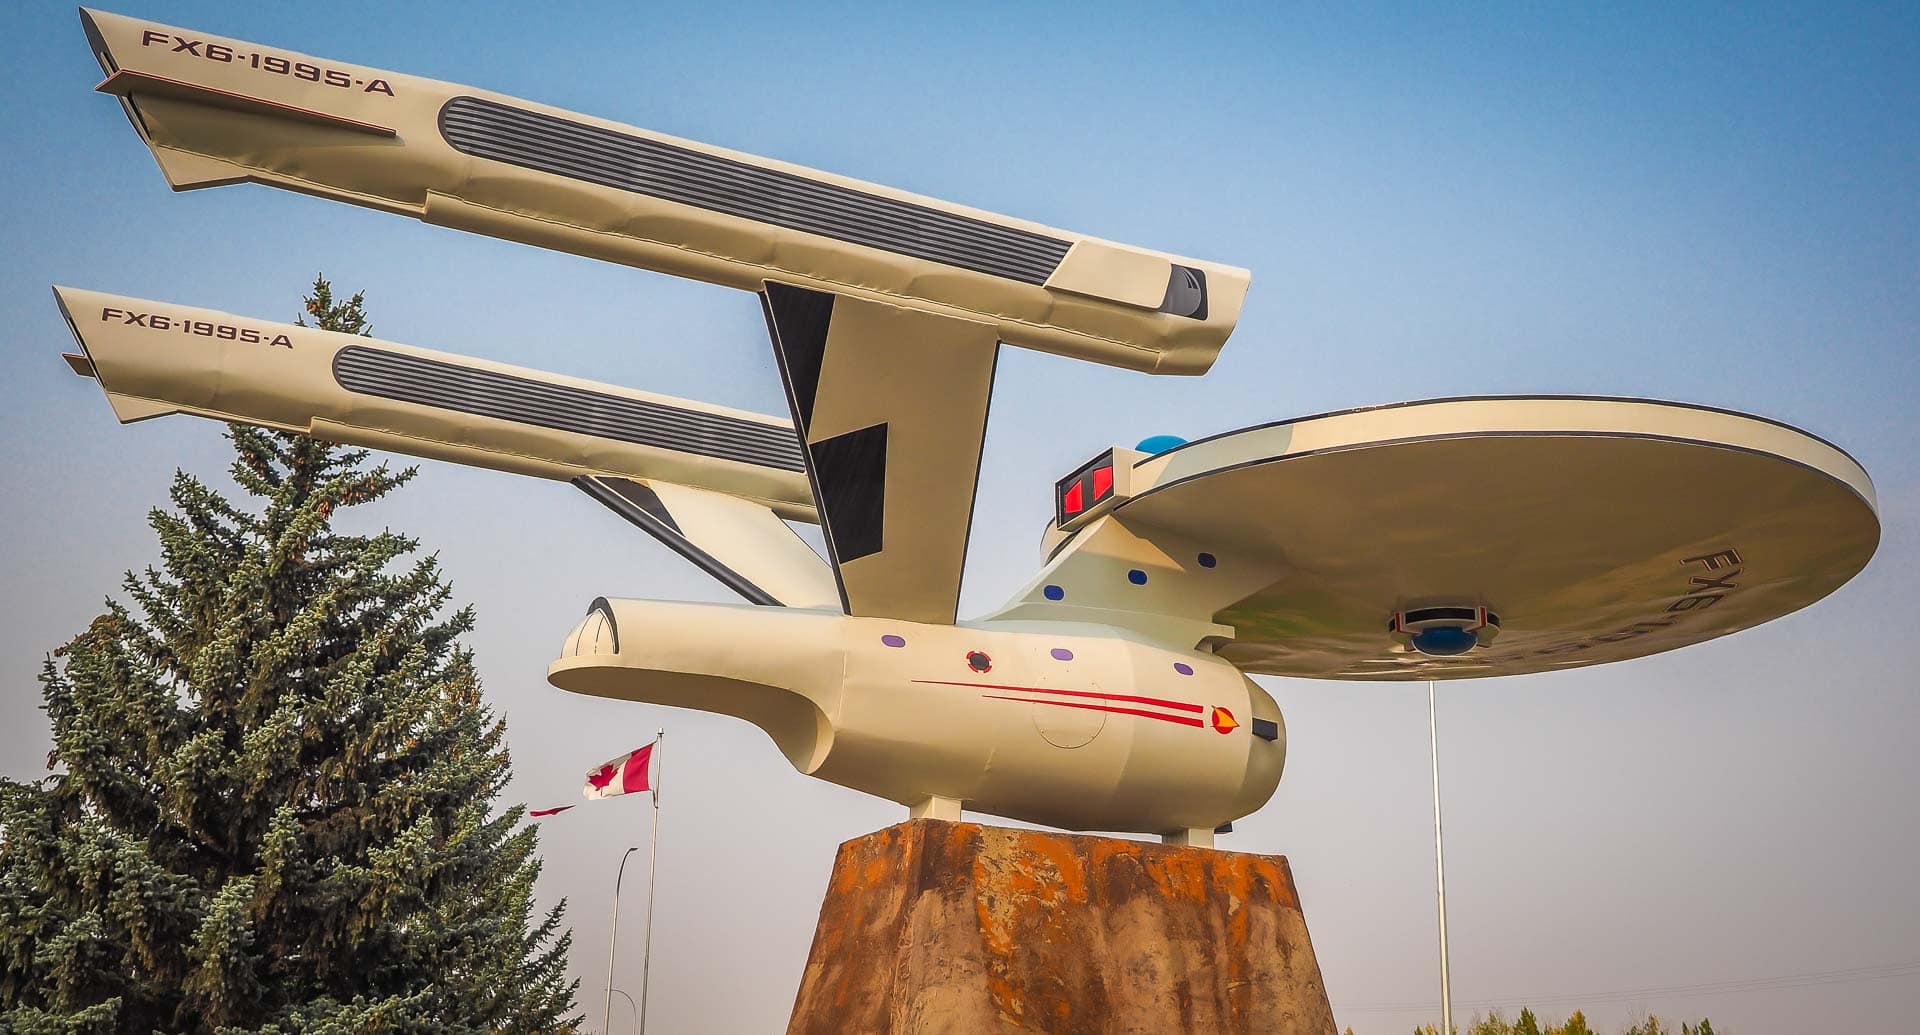 A guide to the best Alberta roadside attractions and Giants of the Prairies